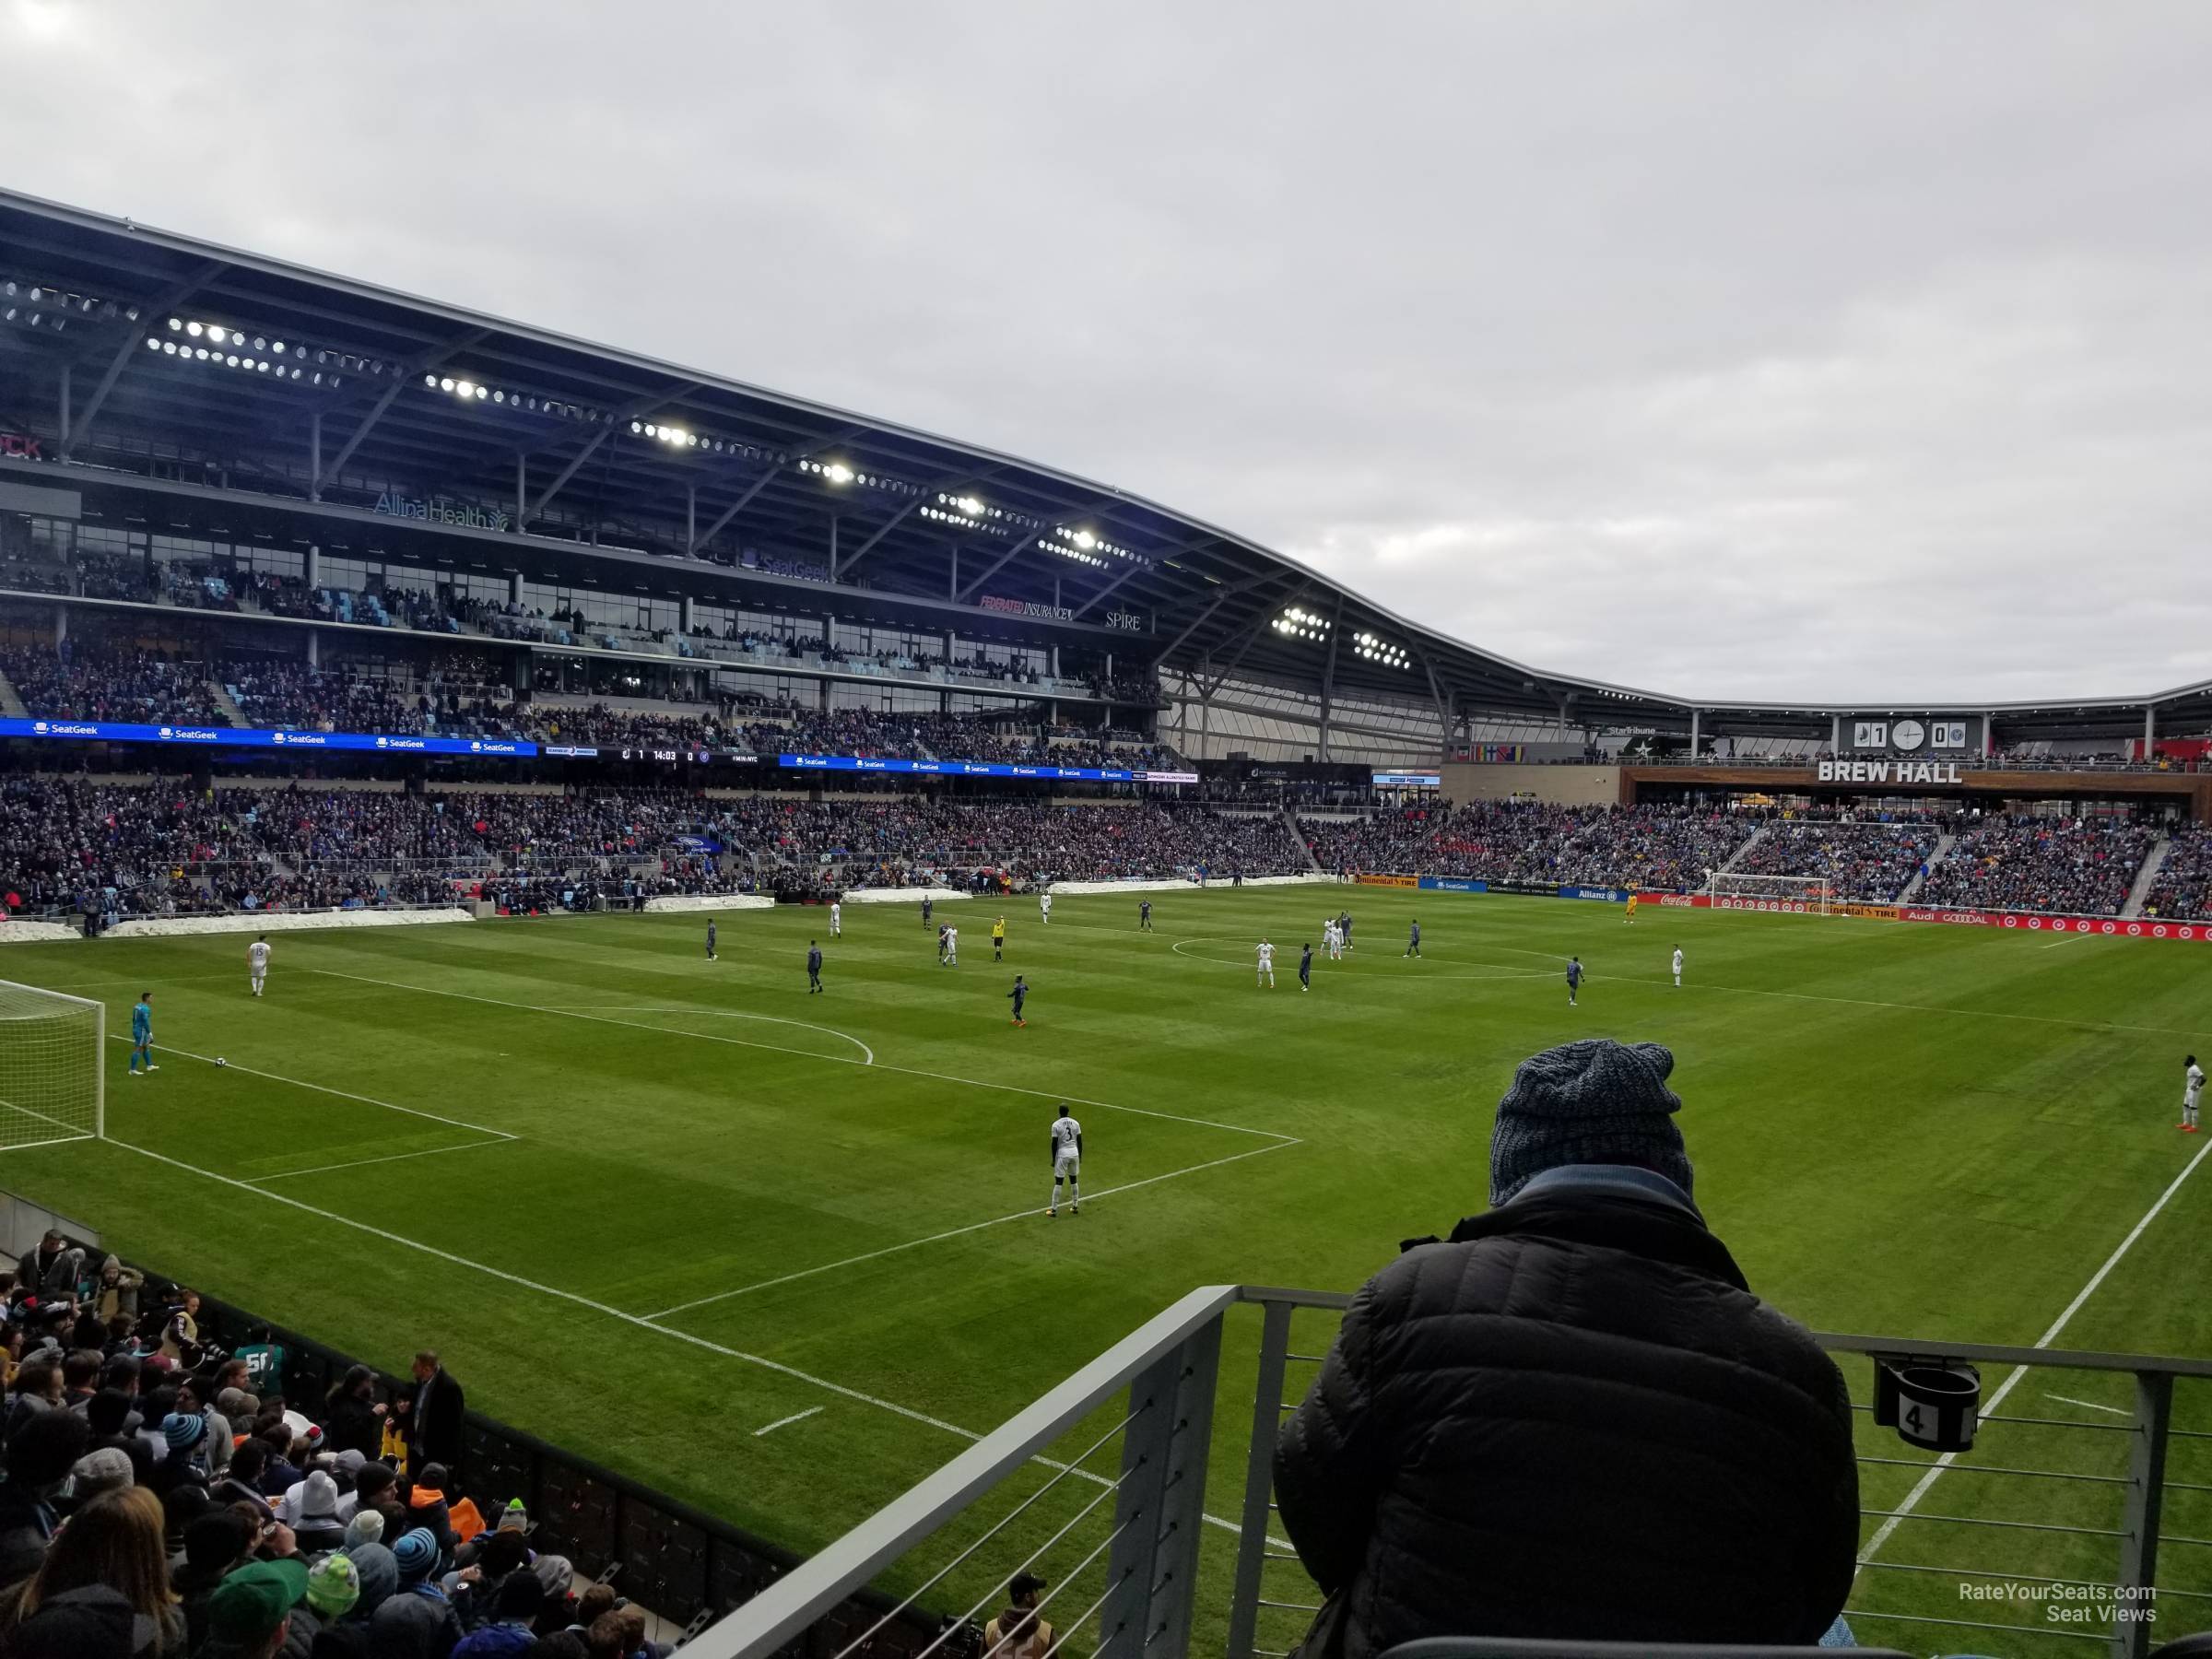 section 19, row 9 seat view  - allianz field